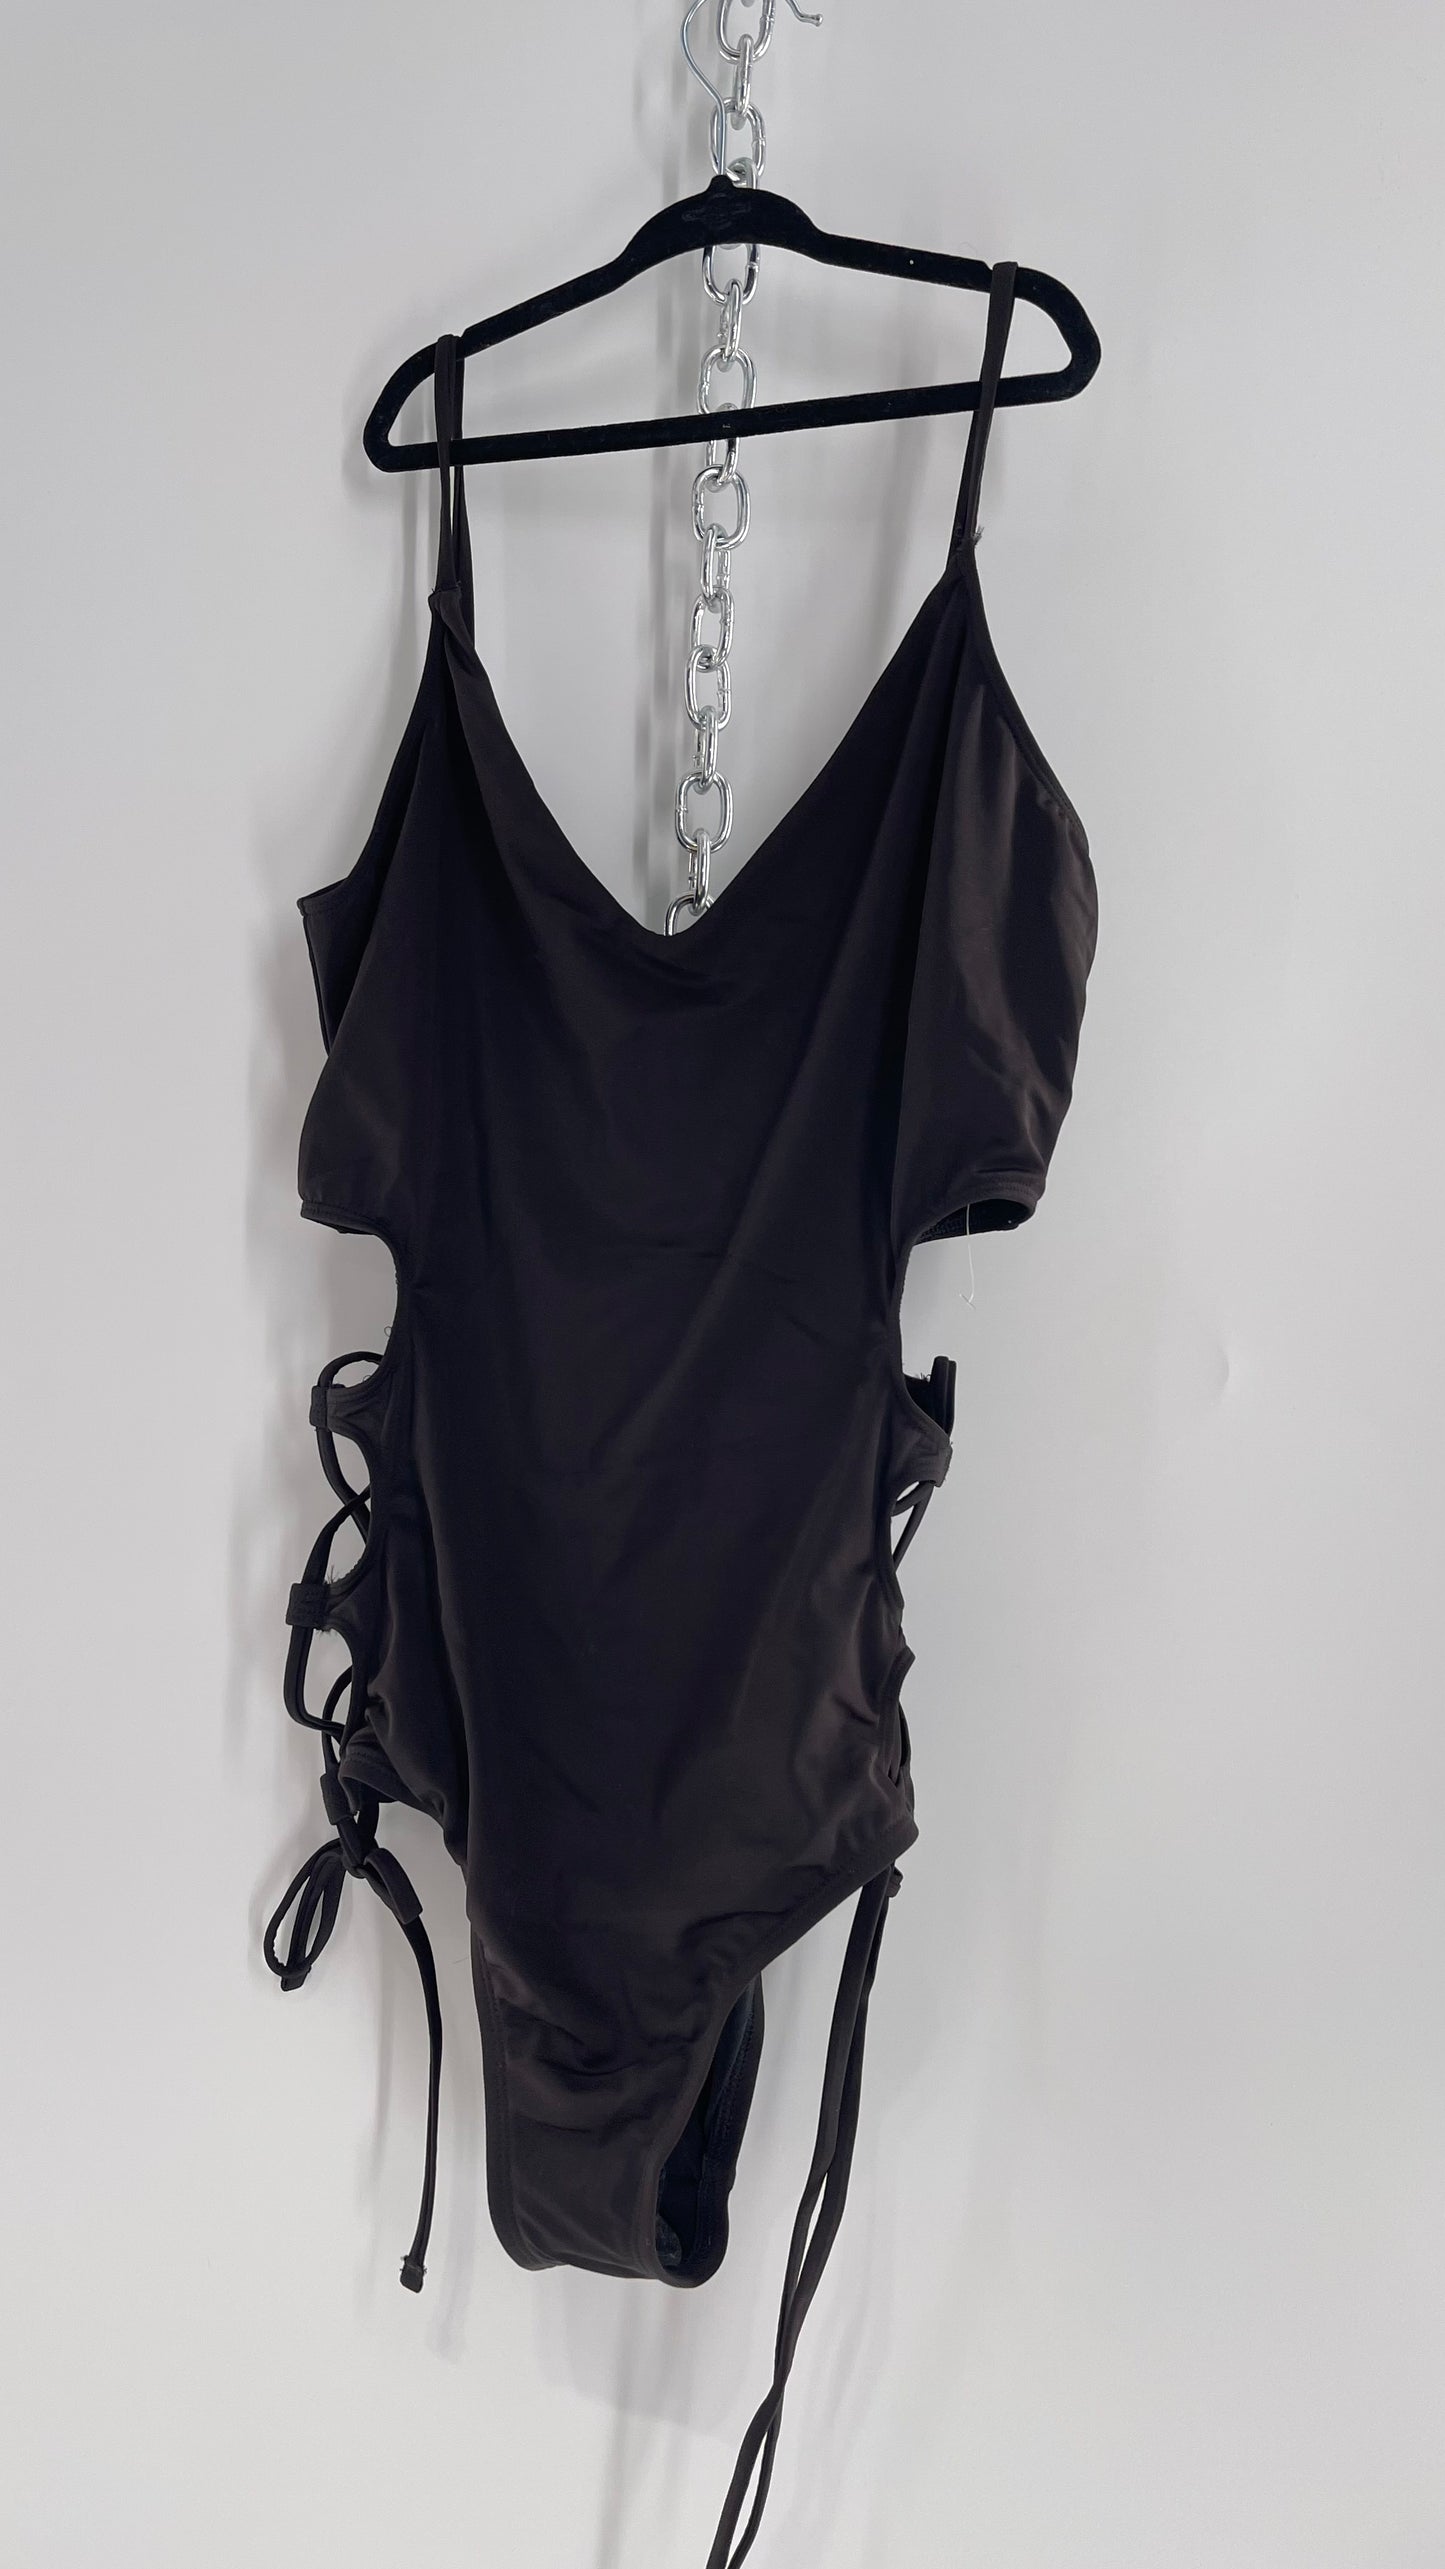 Urban Outfitters Out From Under Black Swimsuit with Lace Up Sides (Large)